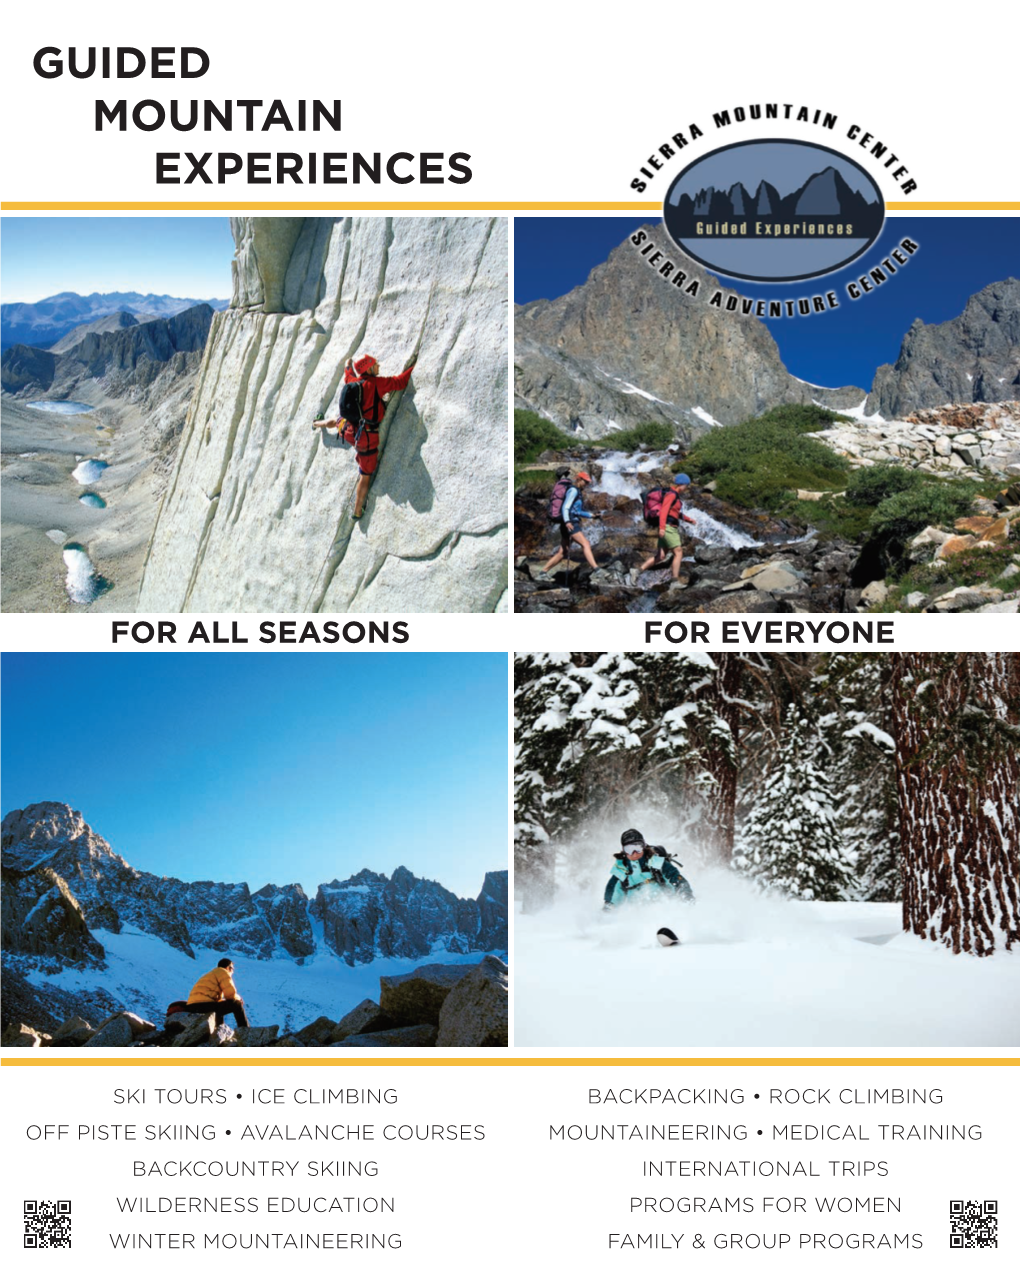 Guided Mountain Experiences